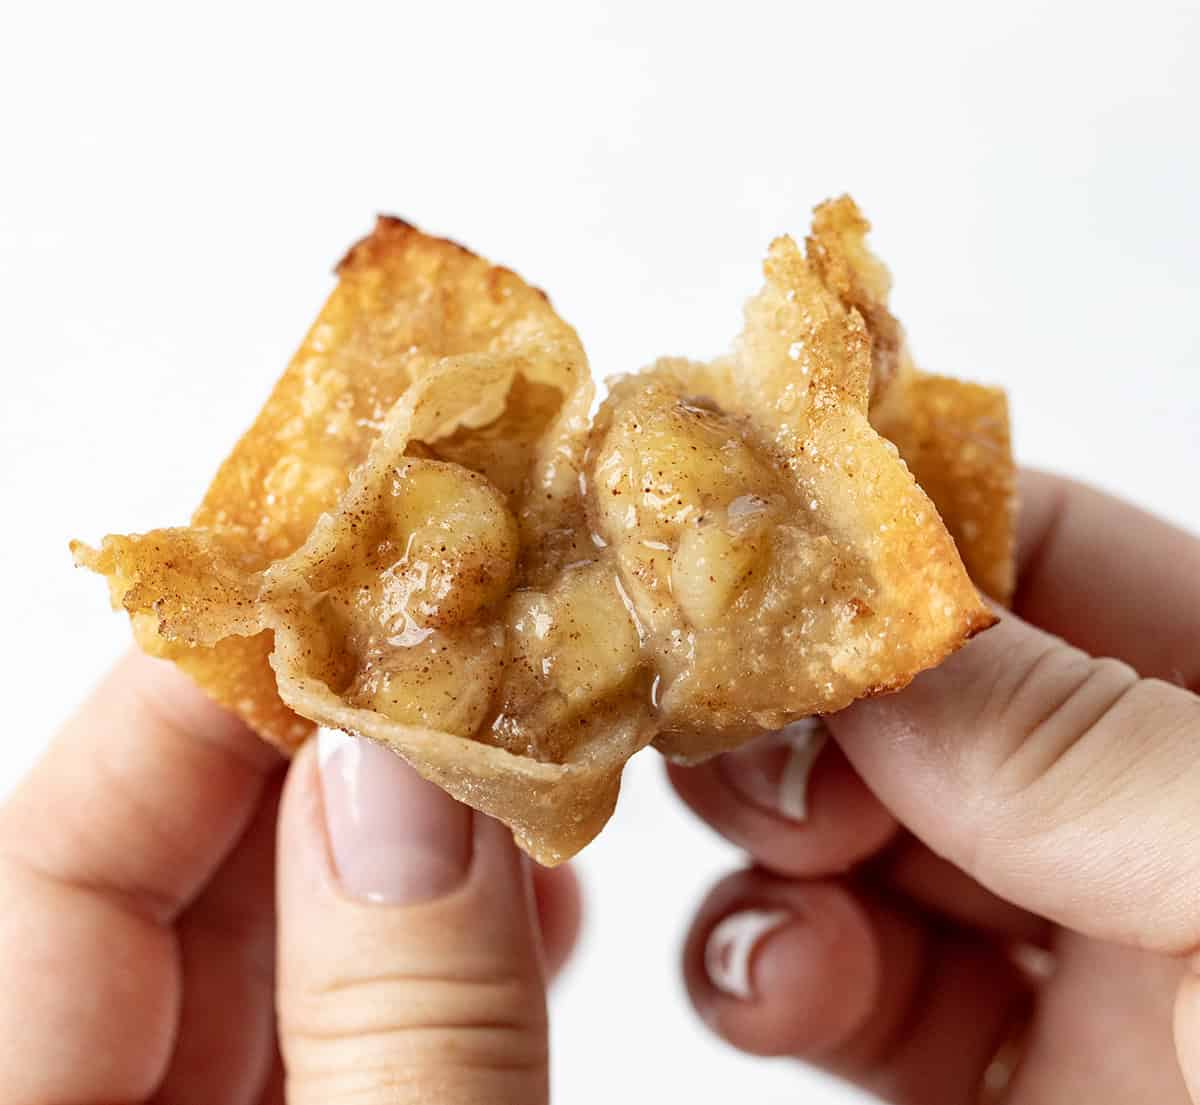 Hand opening a fried banana bite showing the inside texture.